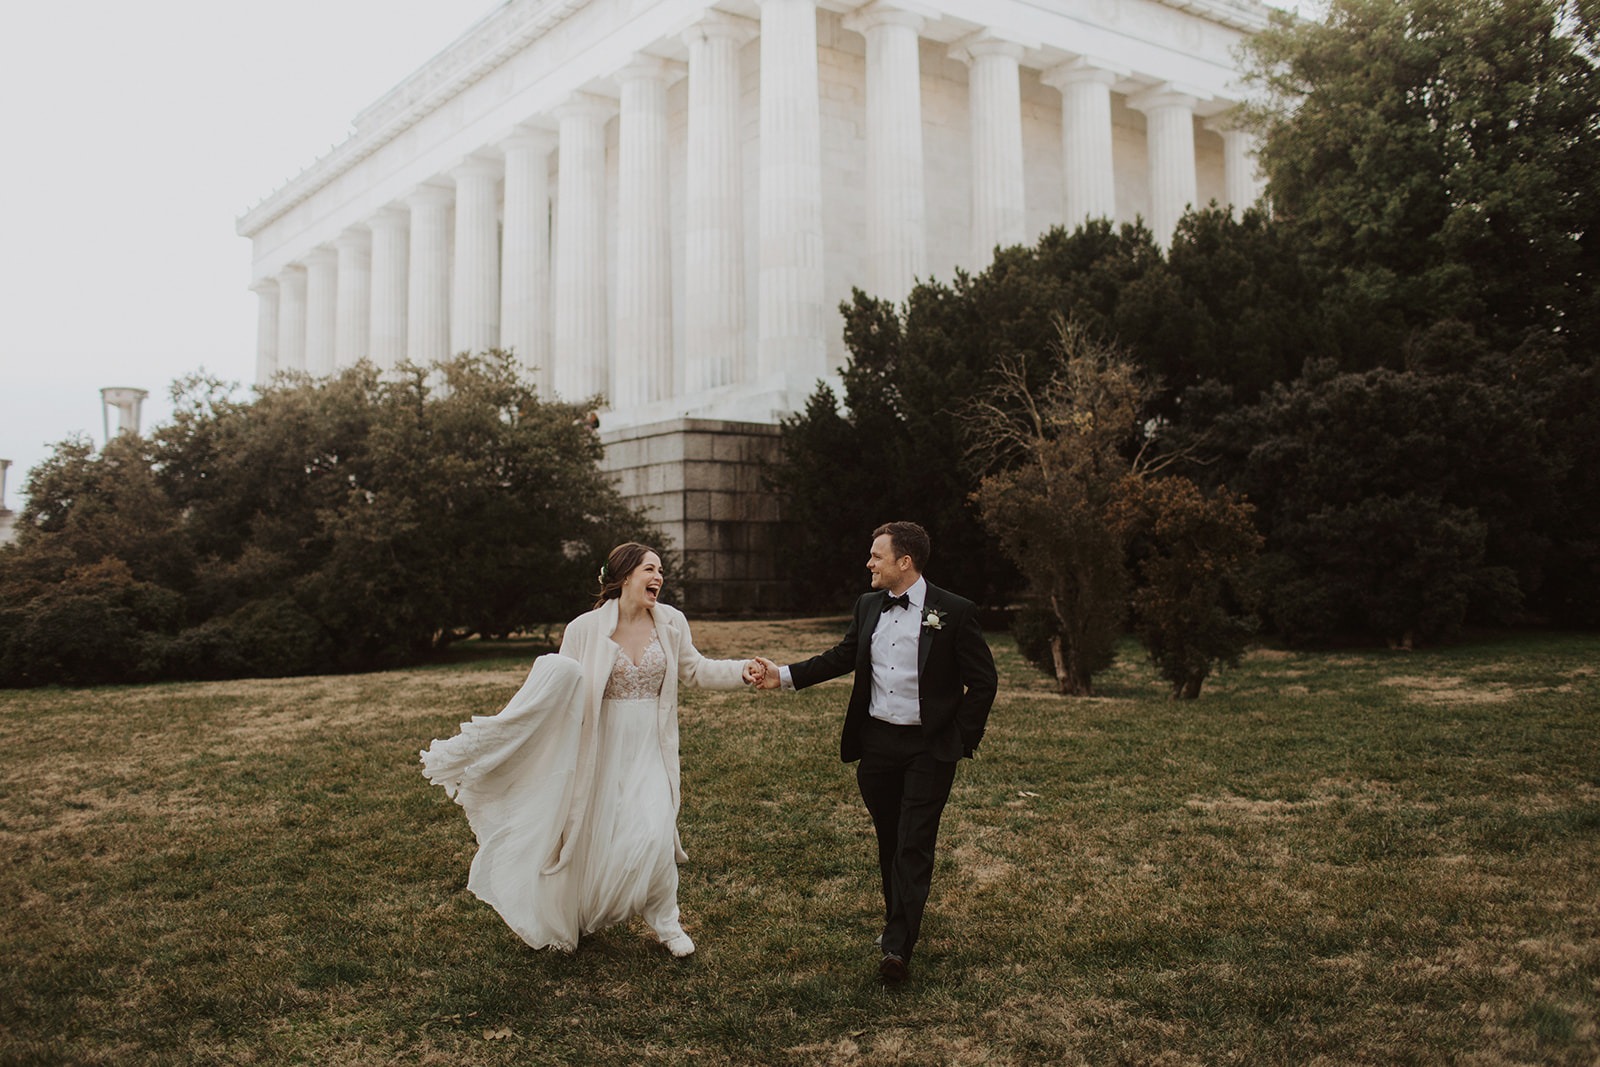 Couple elopes at Lincoln Memorial